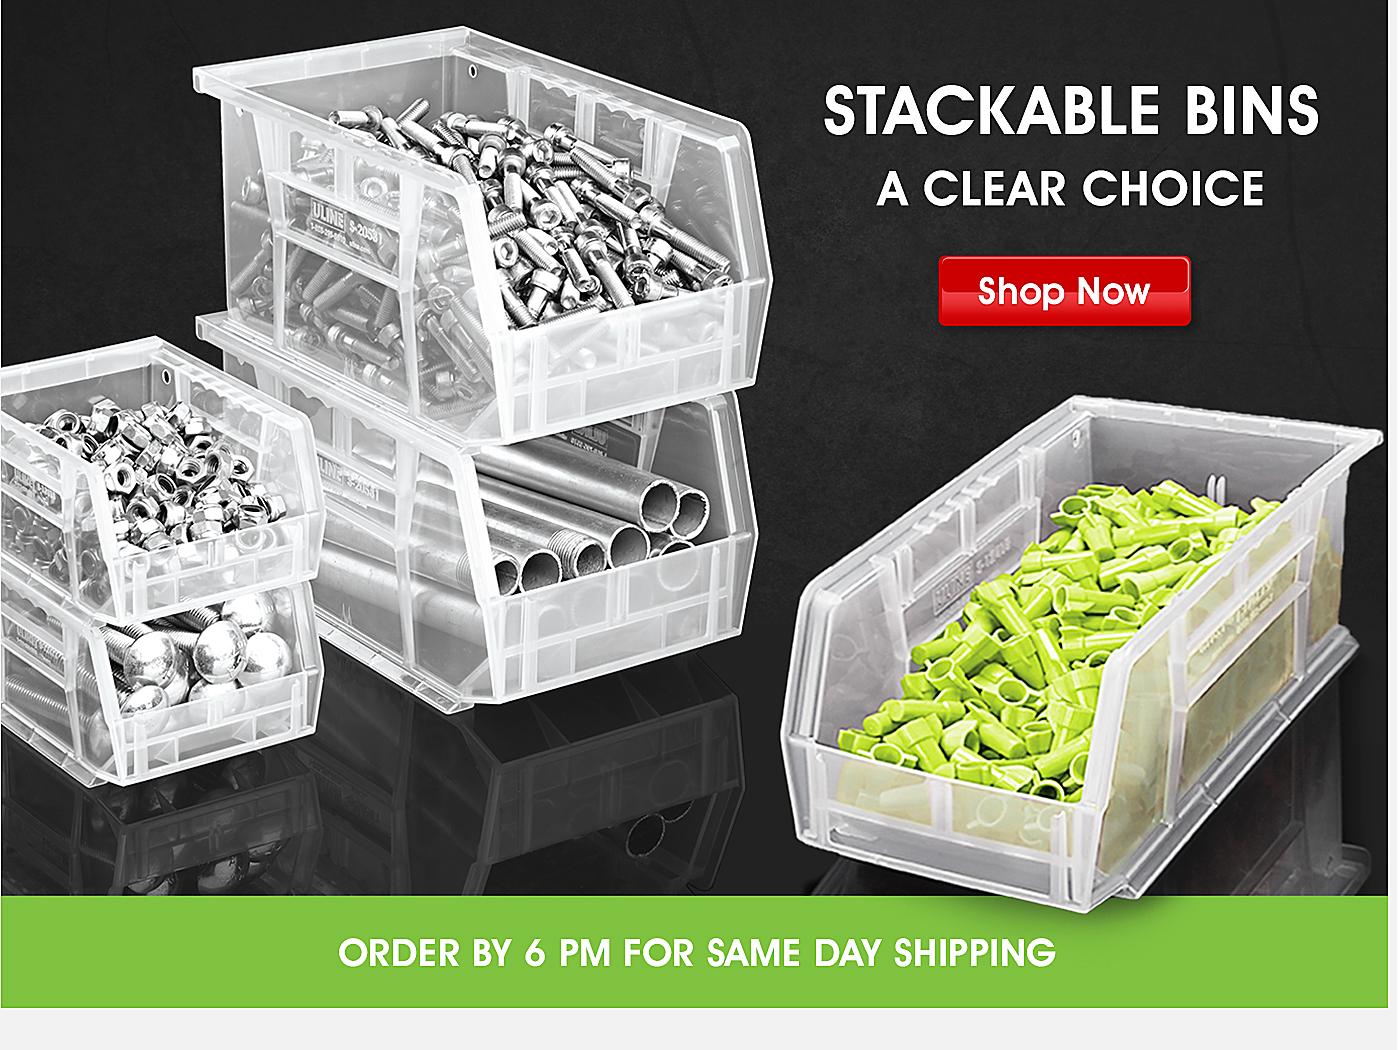 Stackable Bins. A clear choice. Shop Now. ORDER BY 6 PM FOR SAME DAY SHIPPING